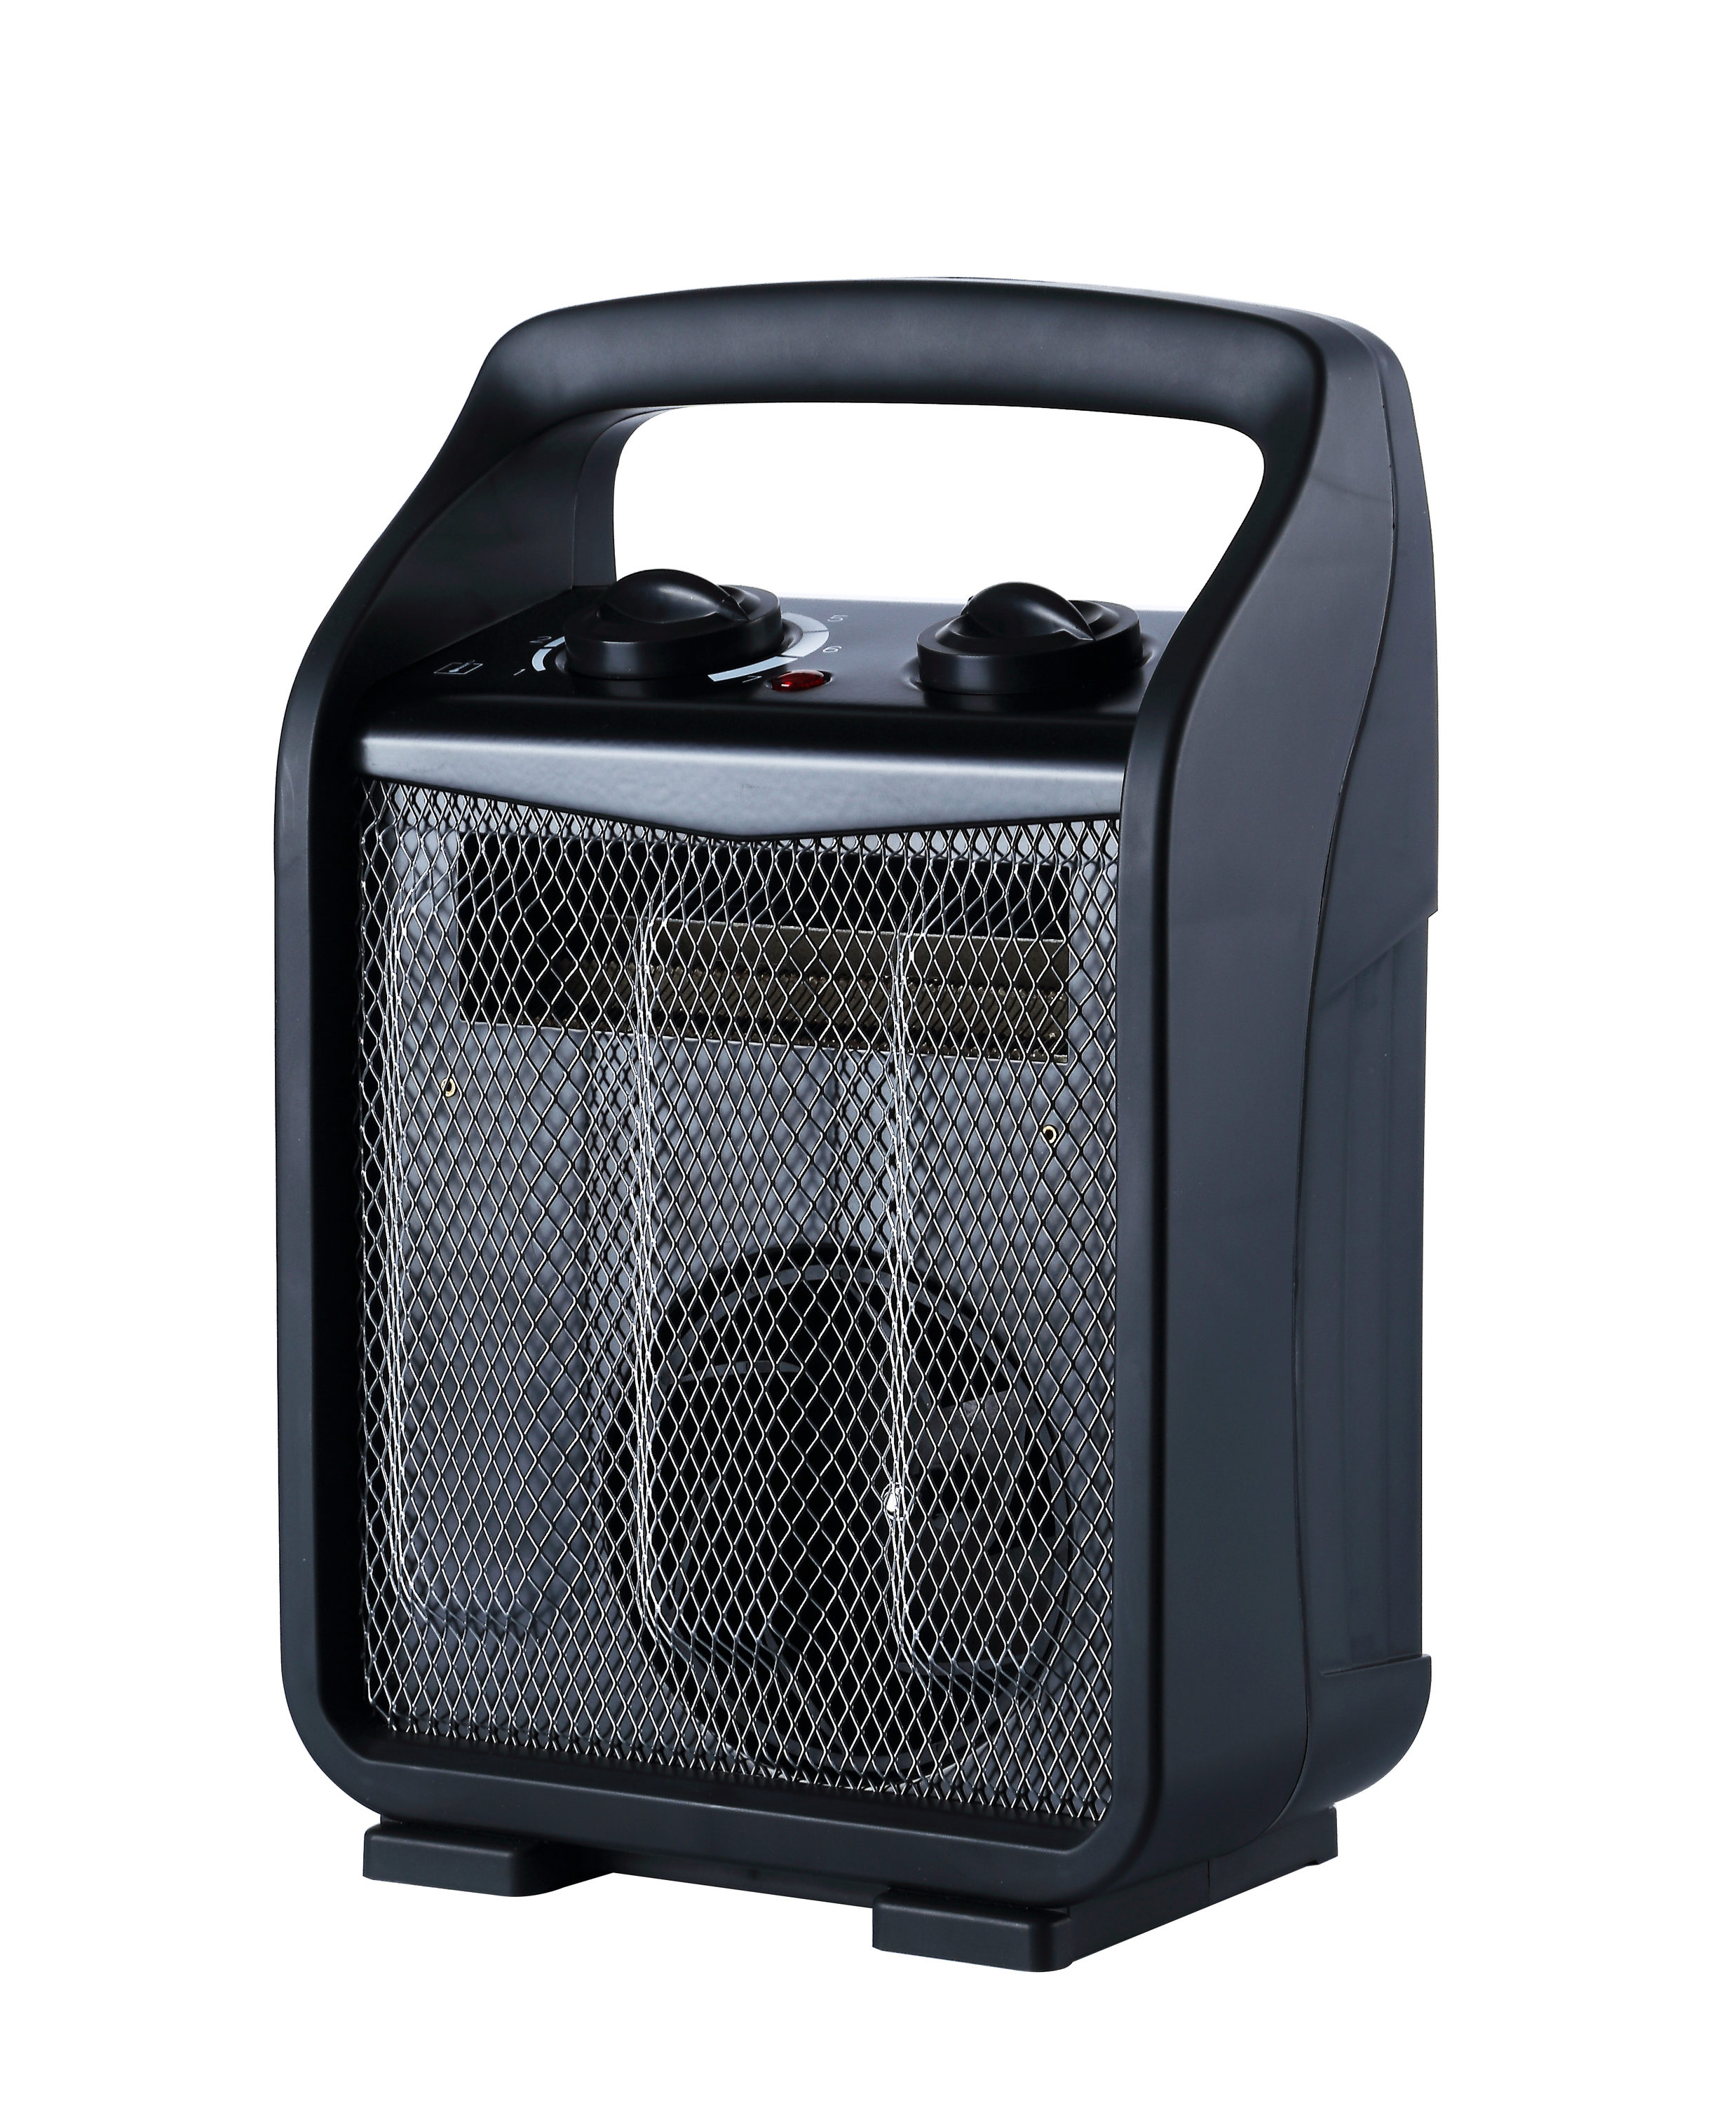 Utility heater fan Electric Space Heaters at Lowes.com